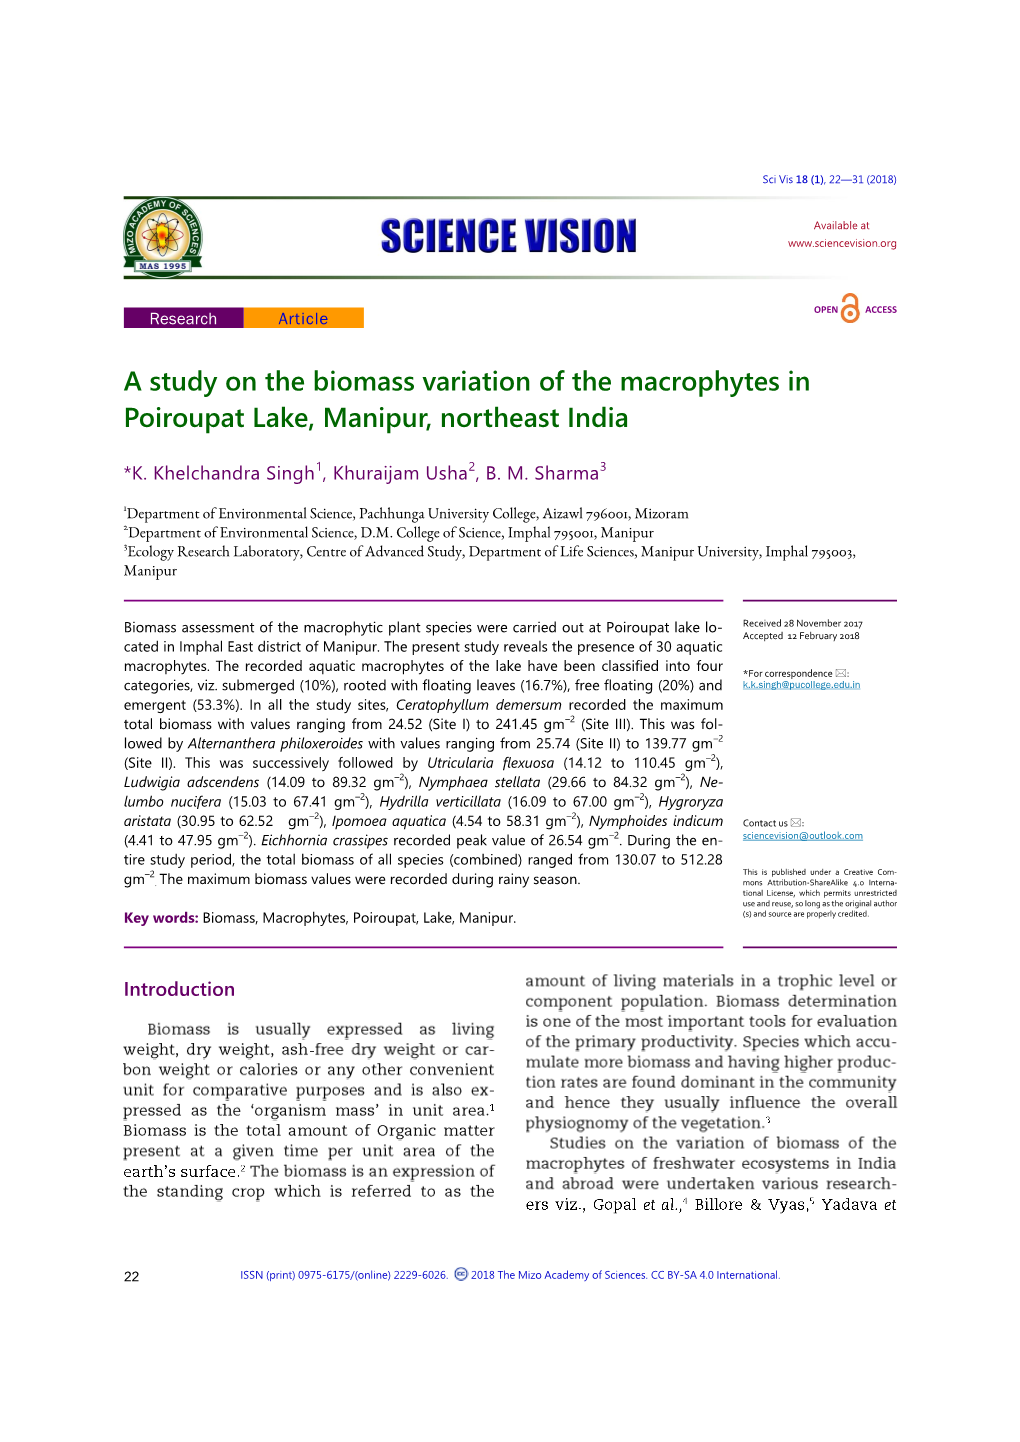 A Study on the Biomass Variation of the Macrophytes in Poiroupat Lake, Manipur, Northeast India